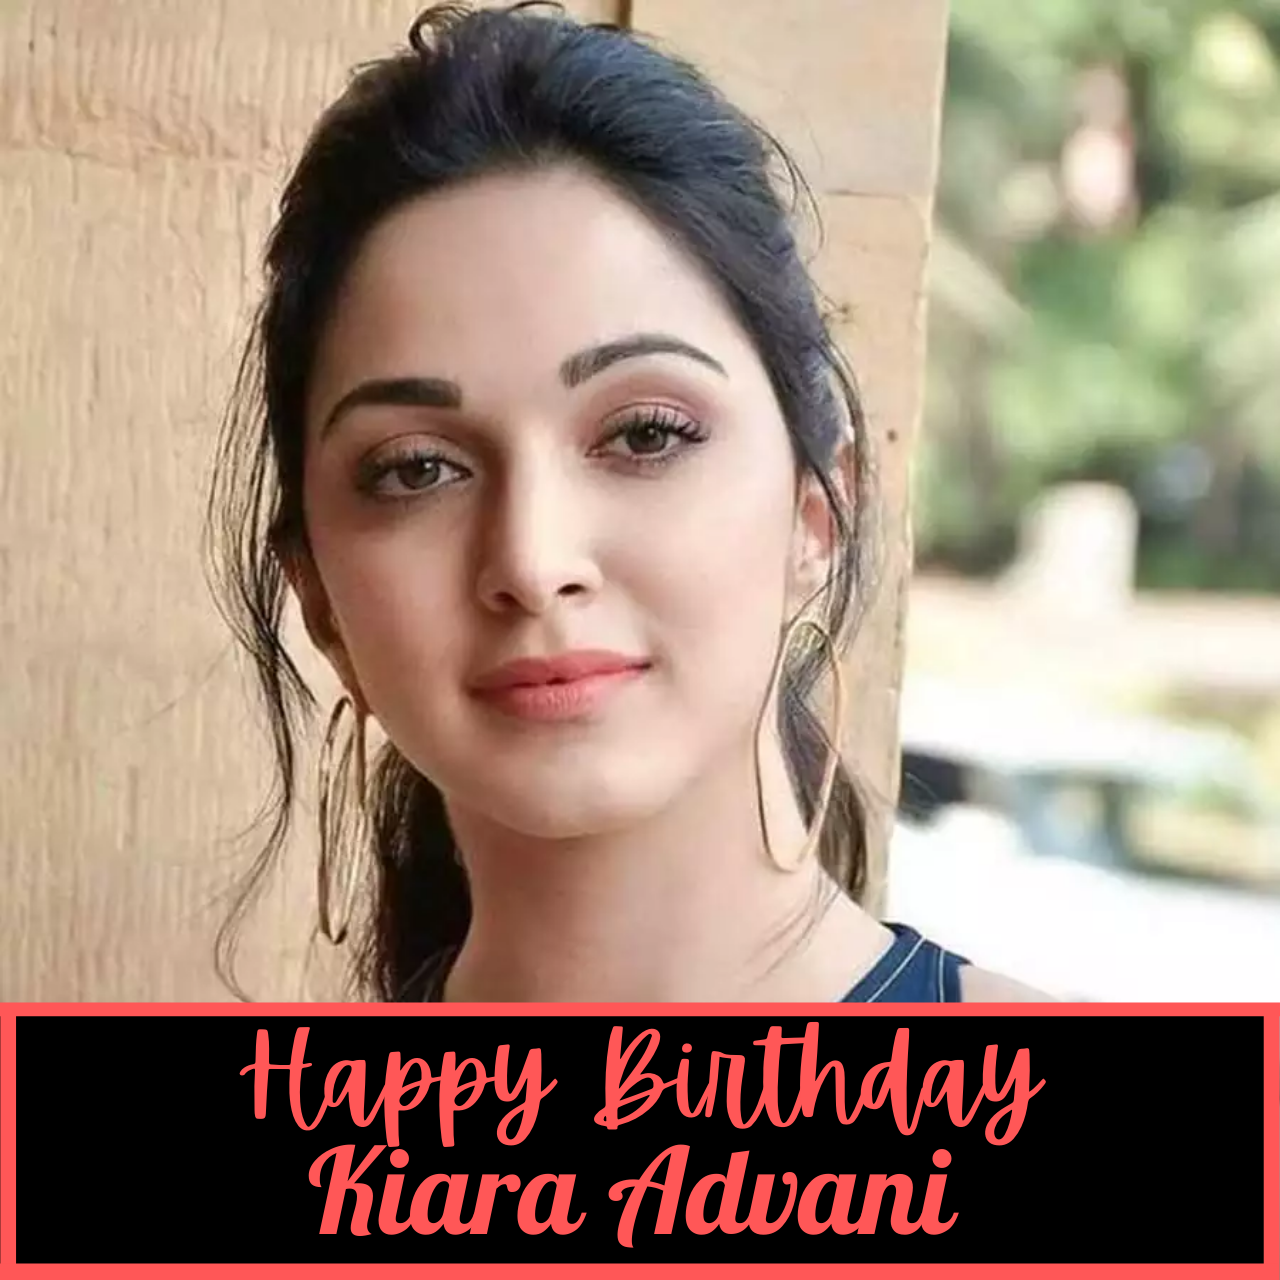 Happy Birthday Kiara Advani Wishes, Images, Messages, Greetings, and WhatsApp Status Video to Download